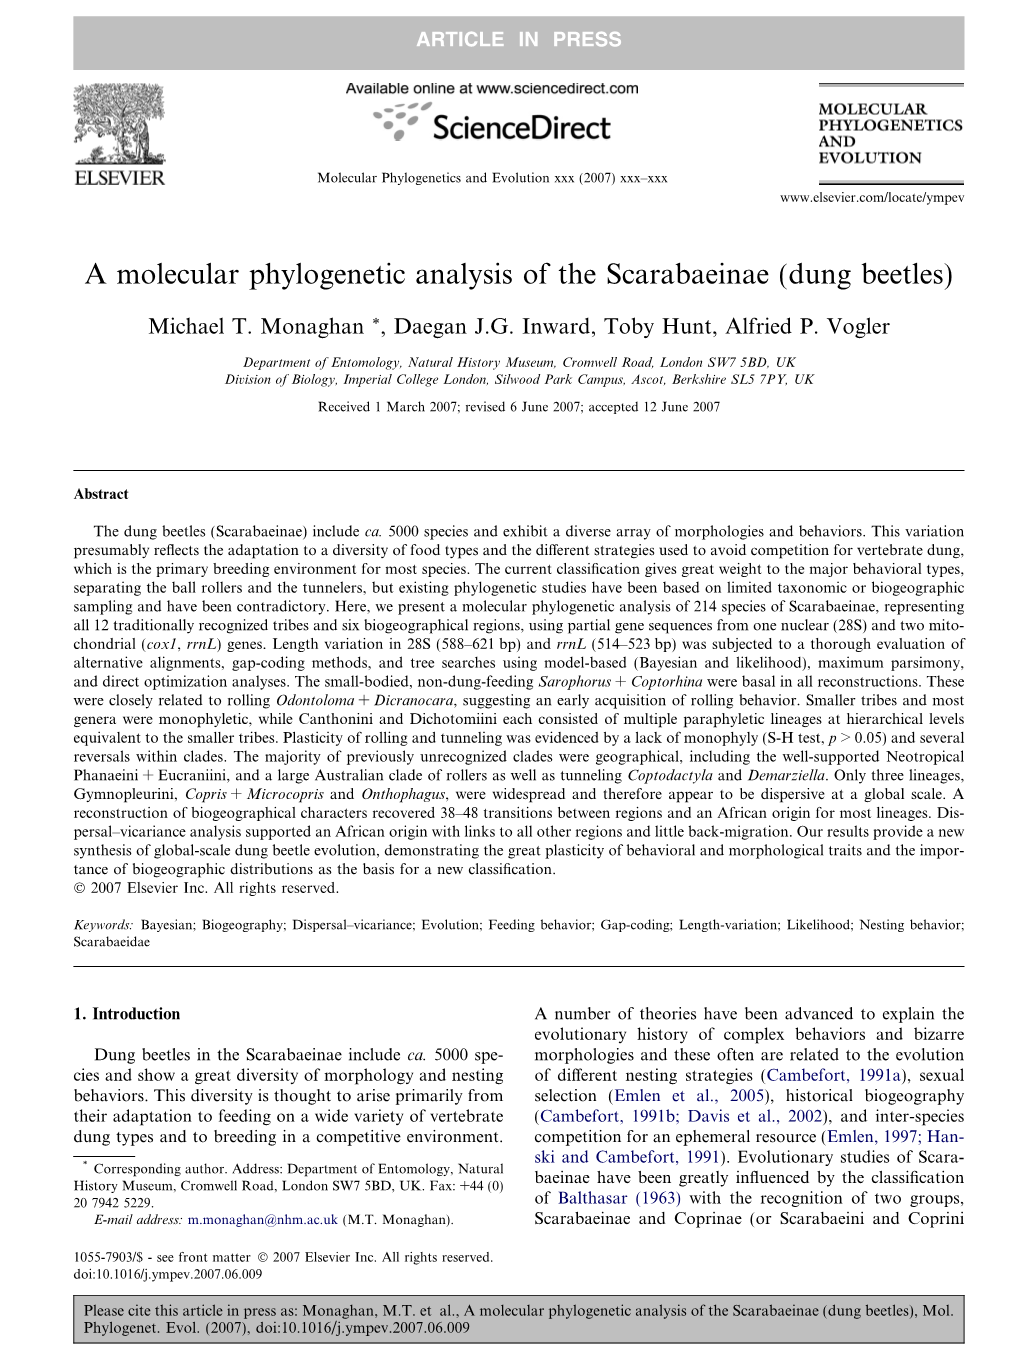 A Molecular Phylogenetic Analysis of the Scarabaeinae (Dung Beetles)